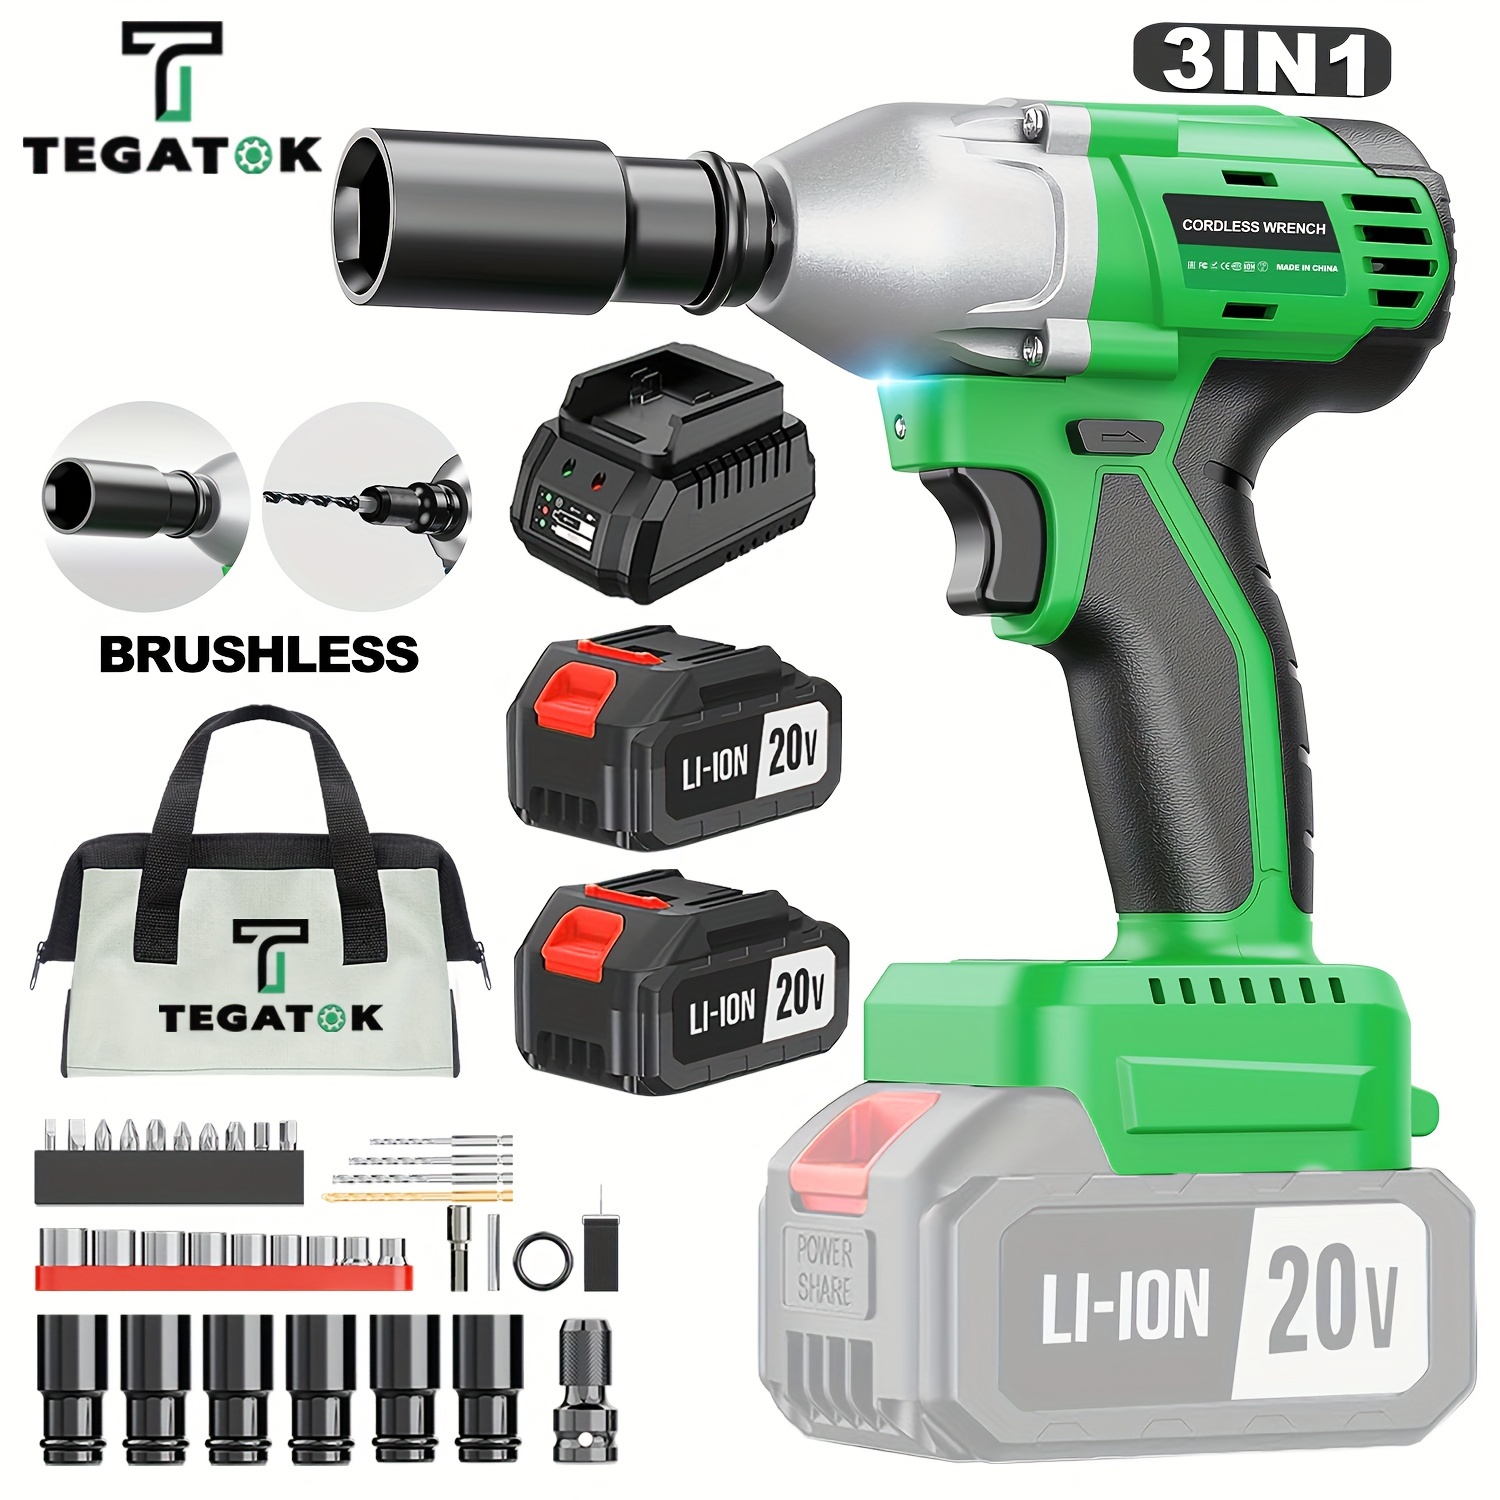 

Tegatok Cordless Impact Wrench, Power Impact Gun 1/2 (430n.m), 2400 Rpm Brushless Impact Driver With 4000 Mah Battery, Fast Charger, 6 Sockets & Tool Bag, 3-in-1 Electric Impact Wrench For Car Home